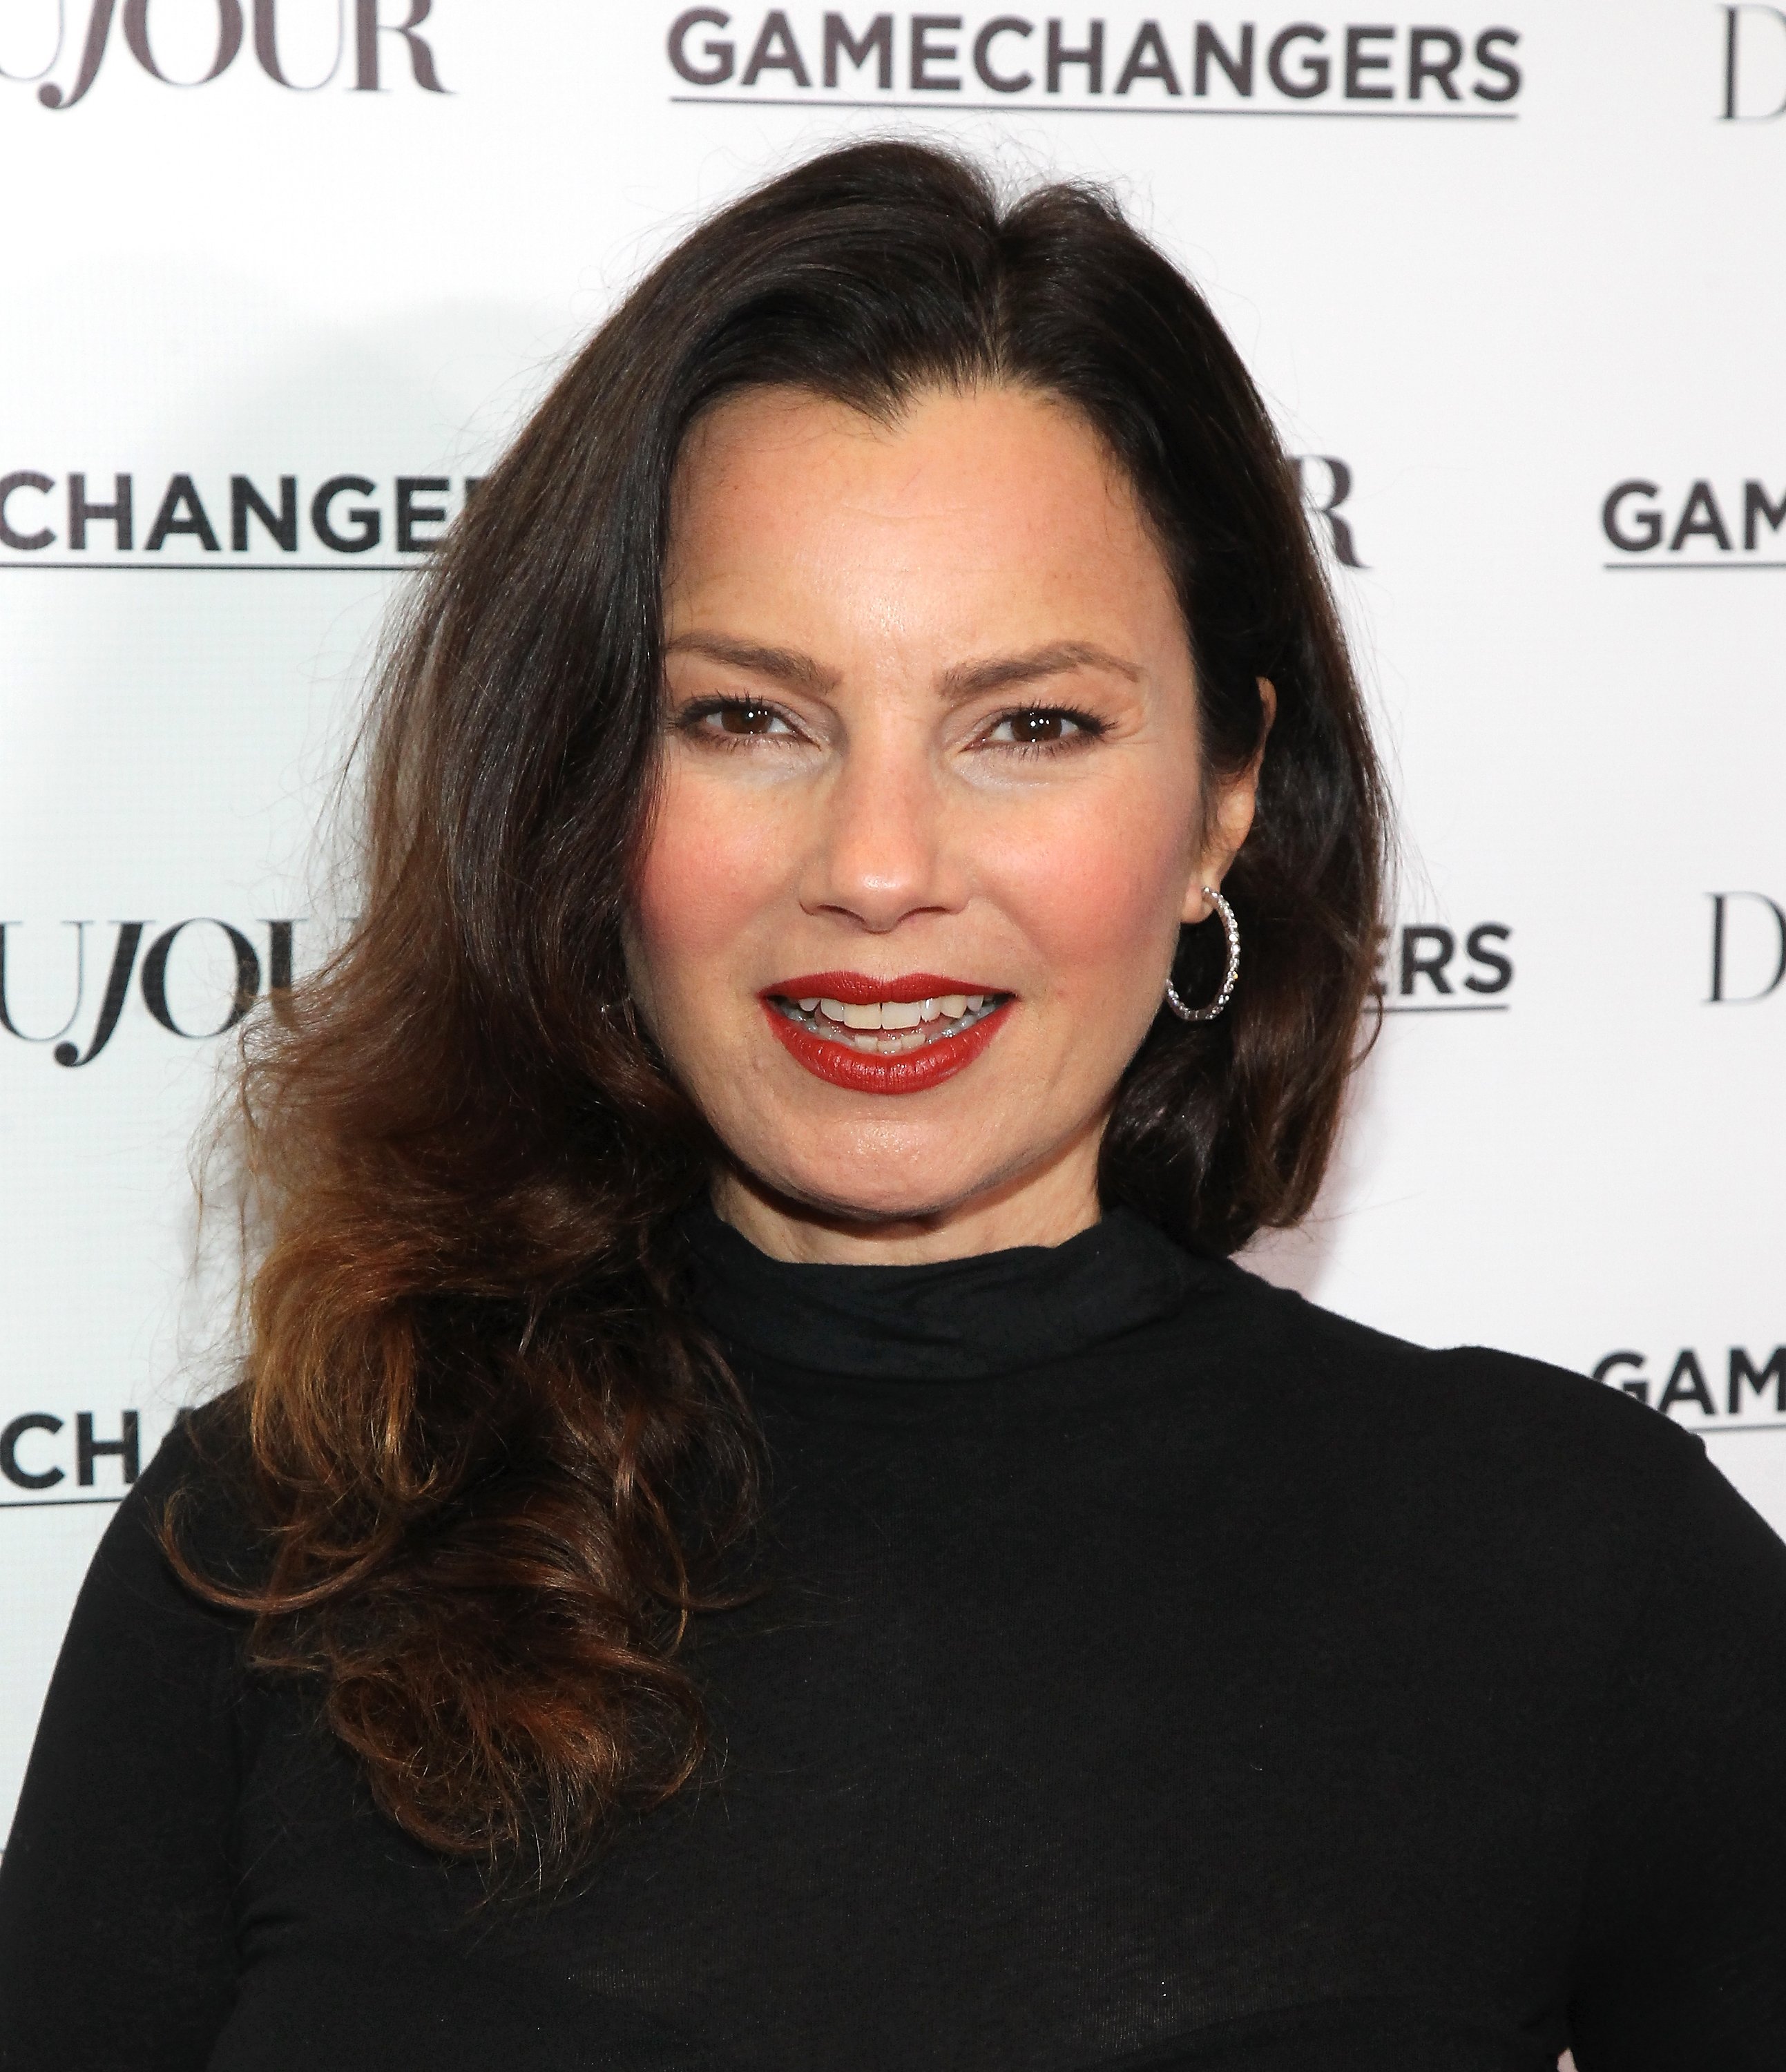 Fran Drescher at DuJour Magazine's Special Gamechangers issue on October 28, 2015 | Photo: GettyImages